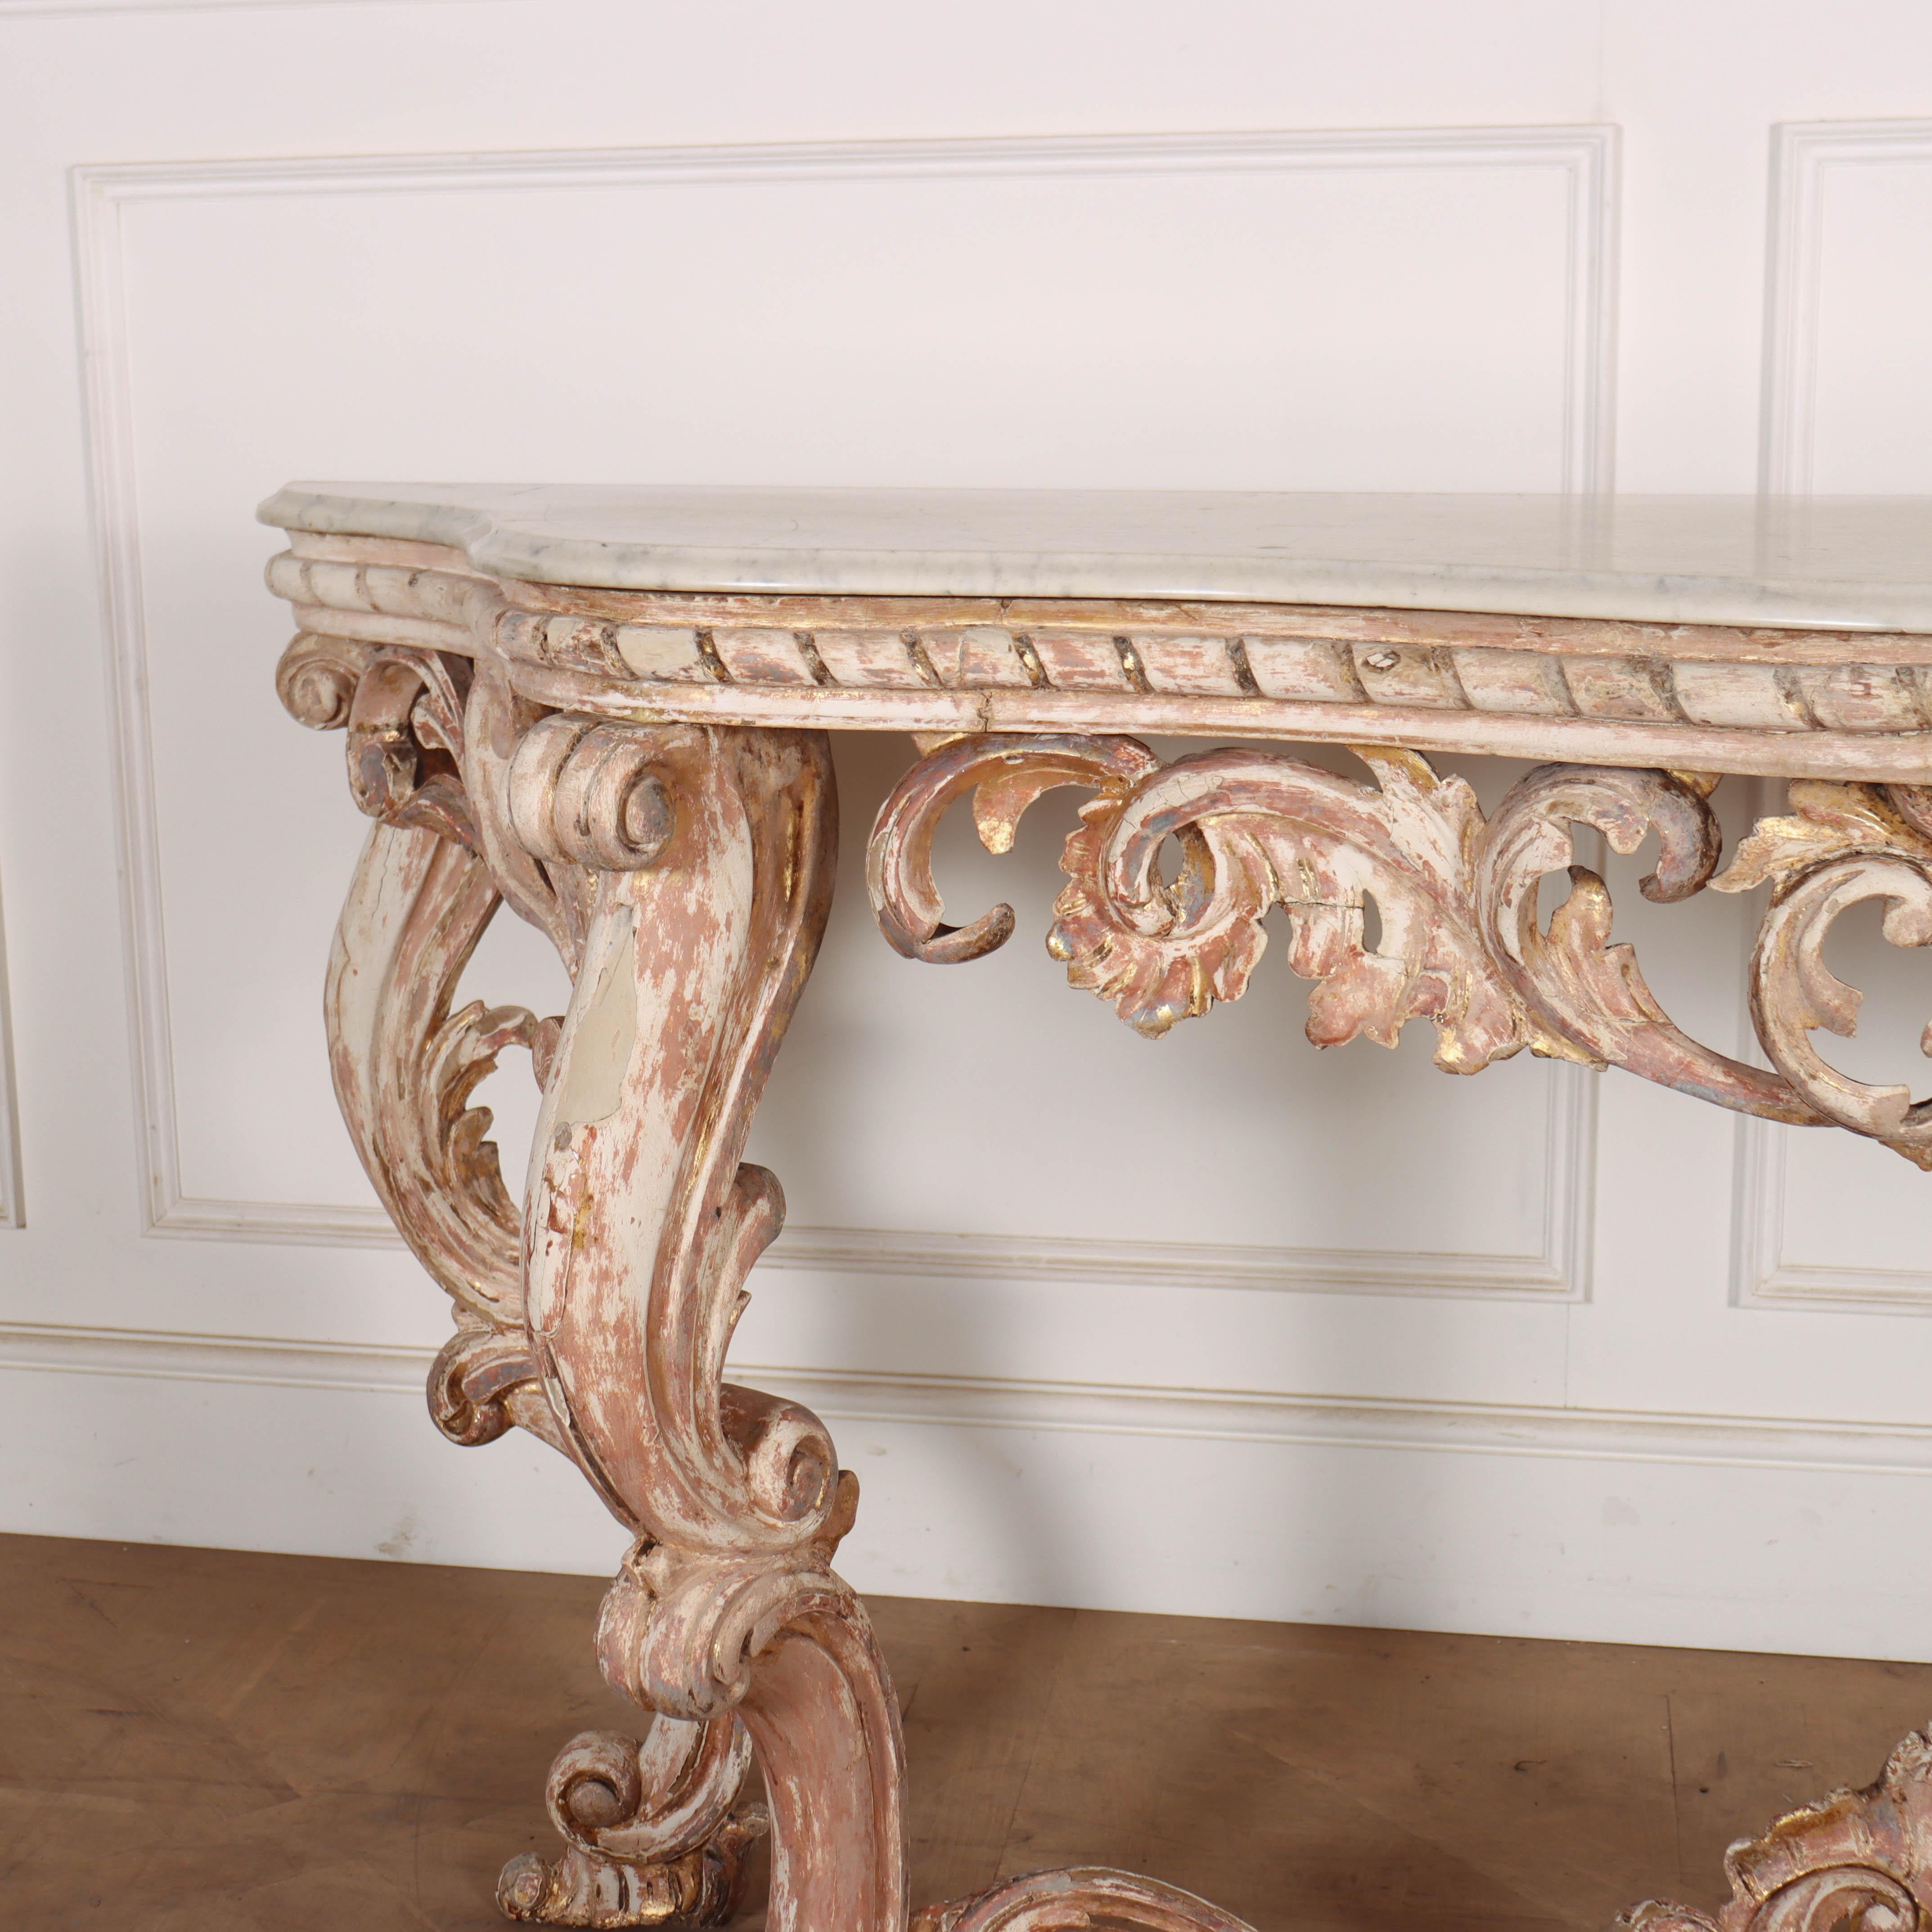 Good early 19th century carved wood marble top console table. Large size. 1820.

Reference: 7866

Dimensions
72.5 inches (184 cms) Wide
21.5 inches (55 cms) Deep
35 inches (89 cms) High